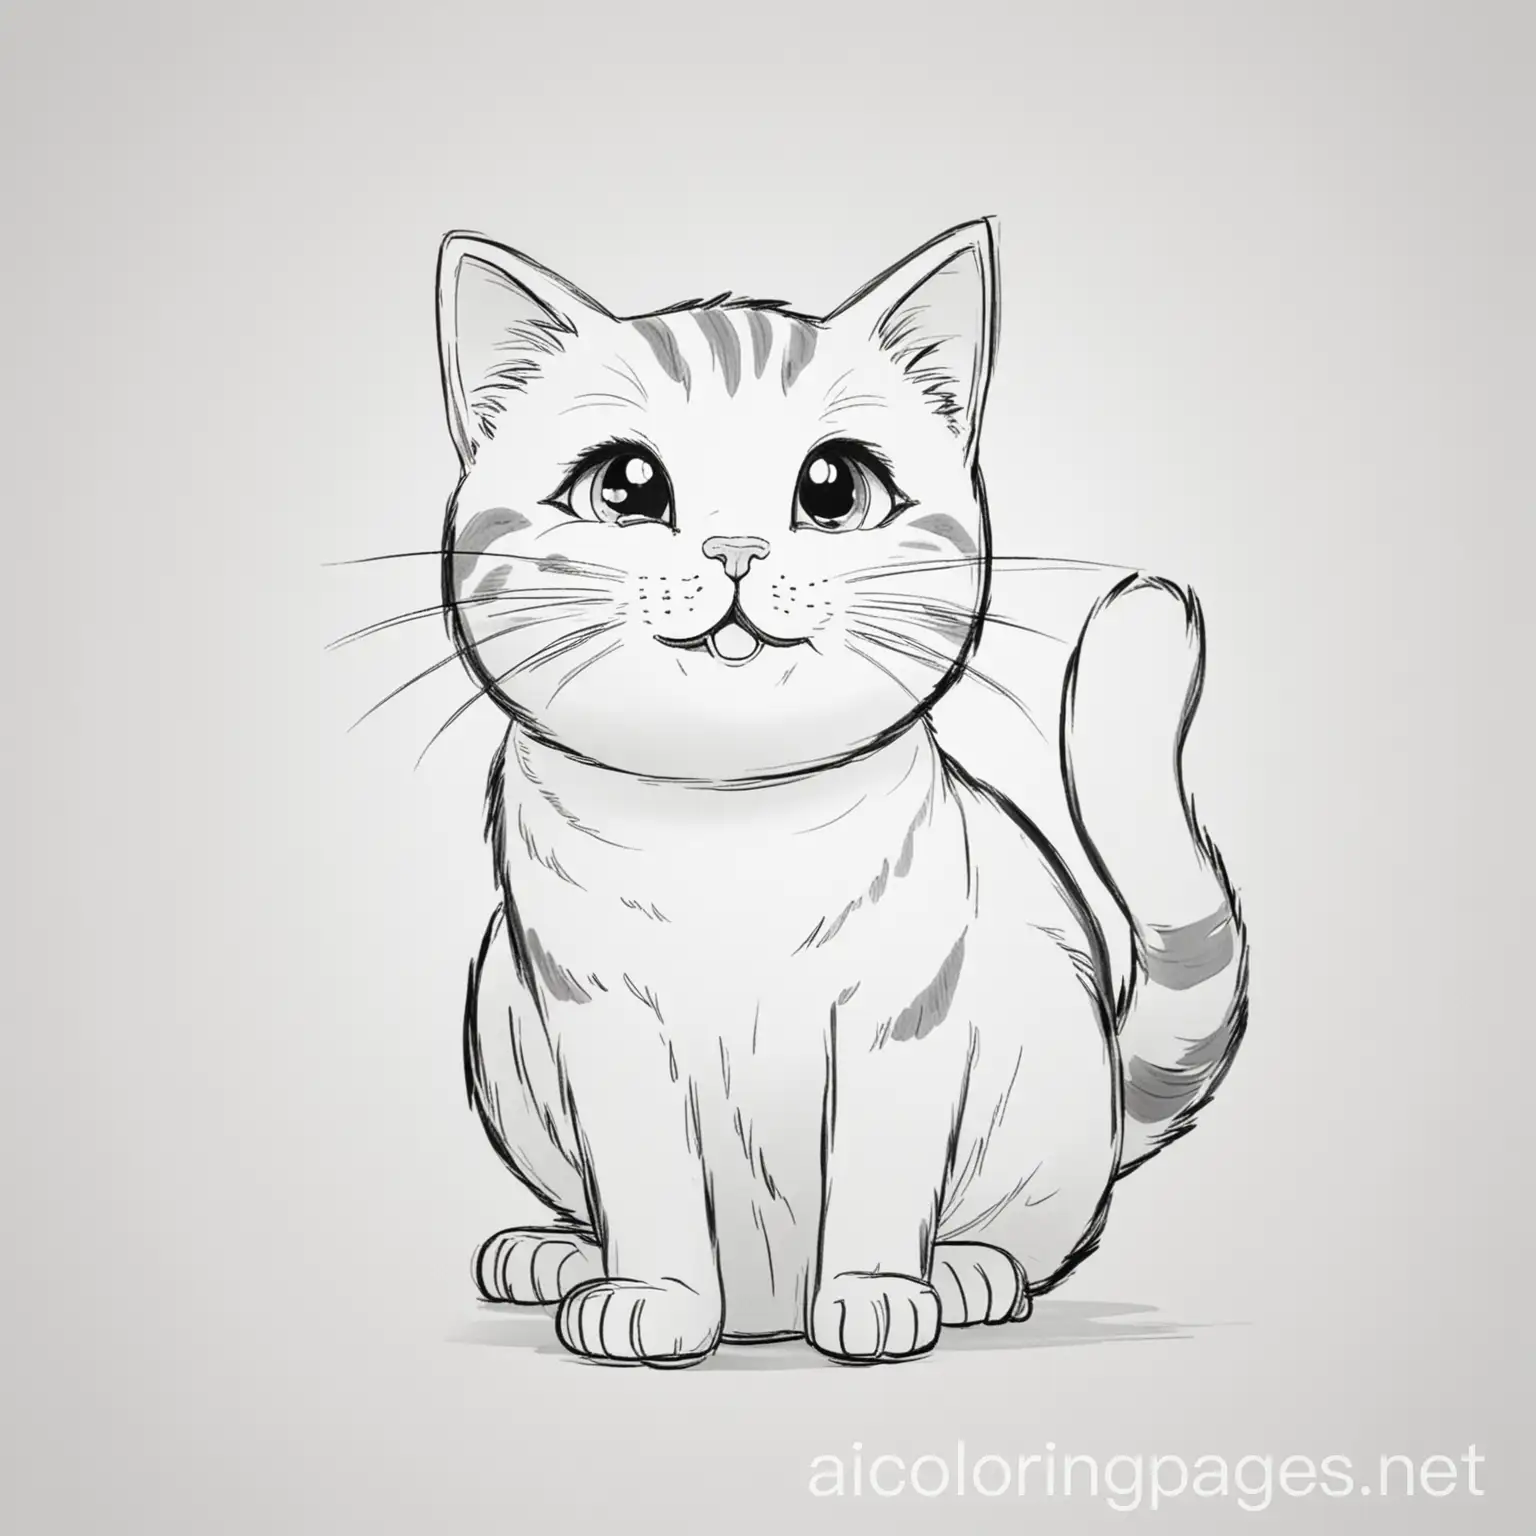 happy cat, Coloring Page, black and white, line art, white background, Simplicity, Ample White Space. The background of the coloring page is plain white to make it easy for young children to color within the lines. The outlines of all the subjects are easy to distinguish, making it simple for kids to color without too much difficulty